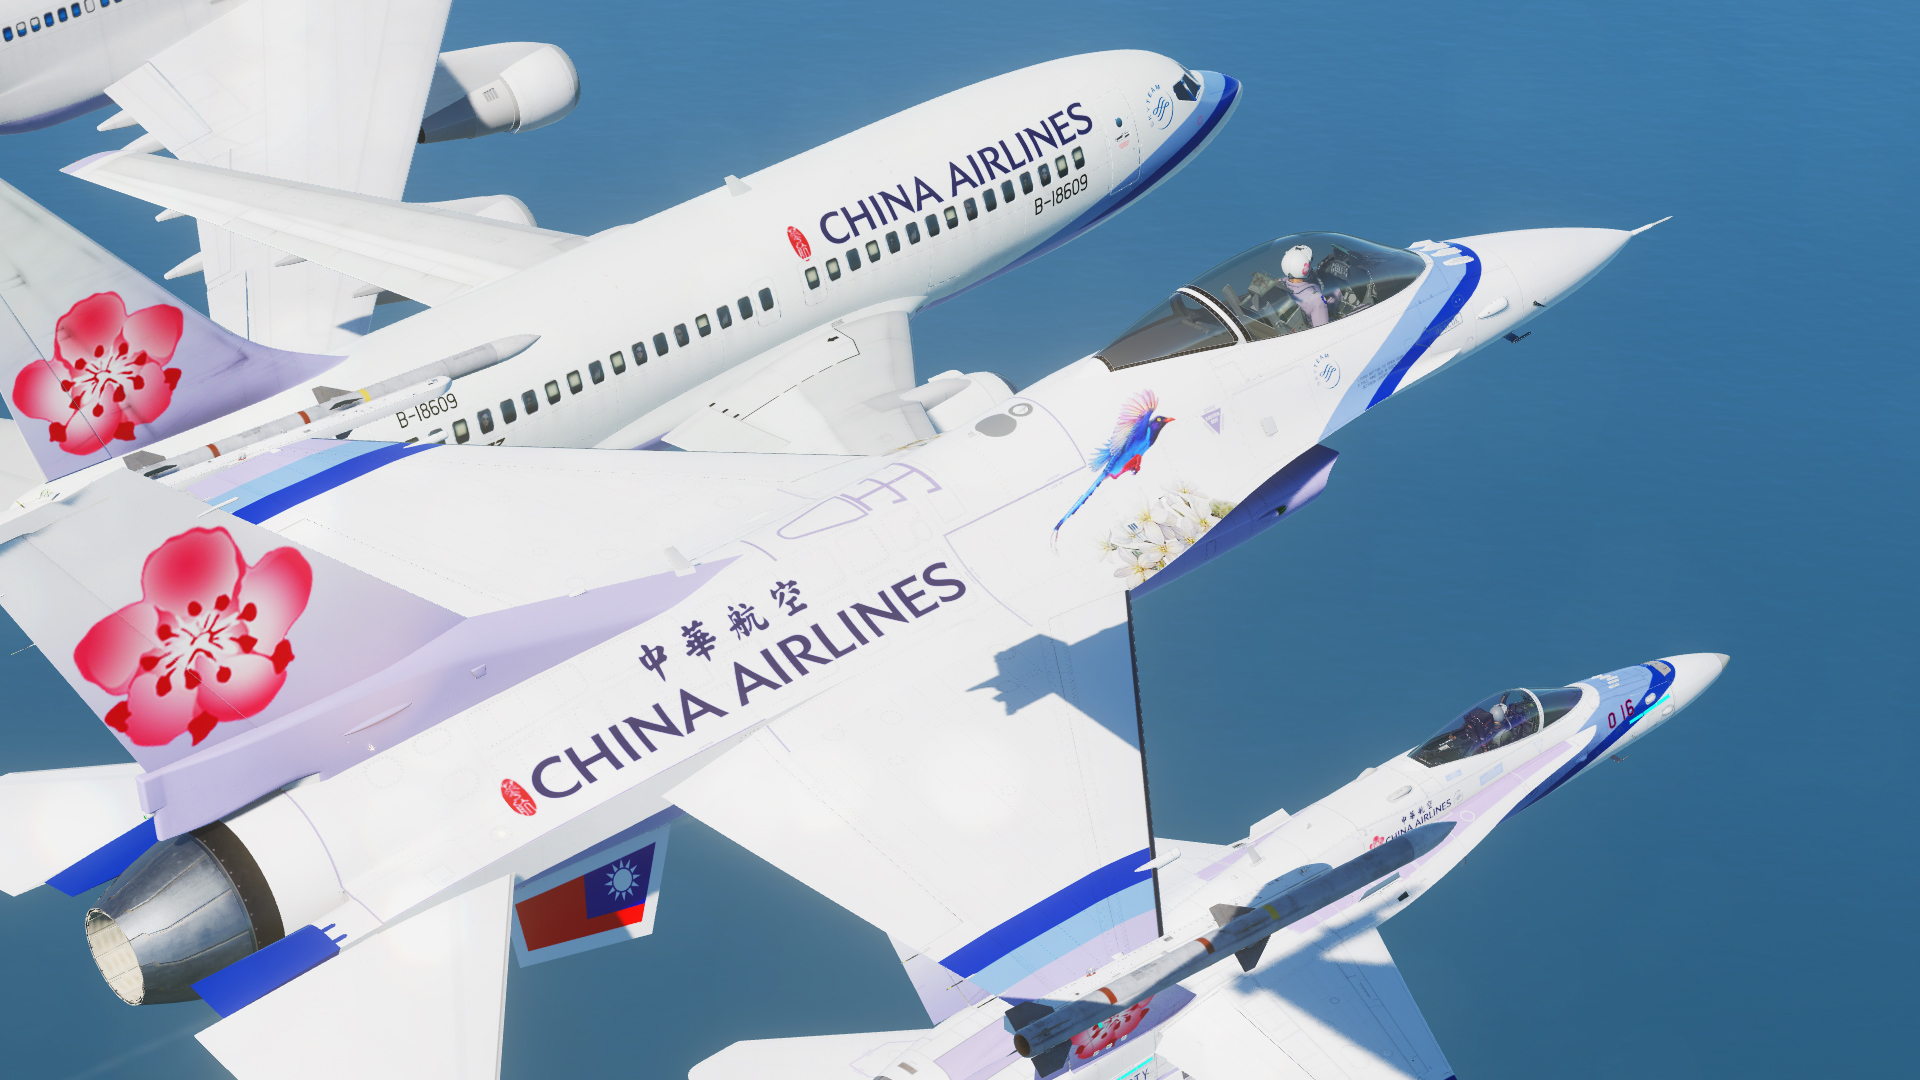 F-16C Viper China Airlines "Blue Magpie" Livery (Fictional)